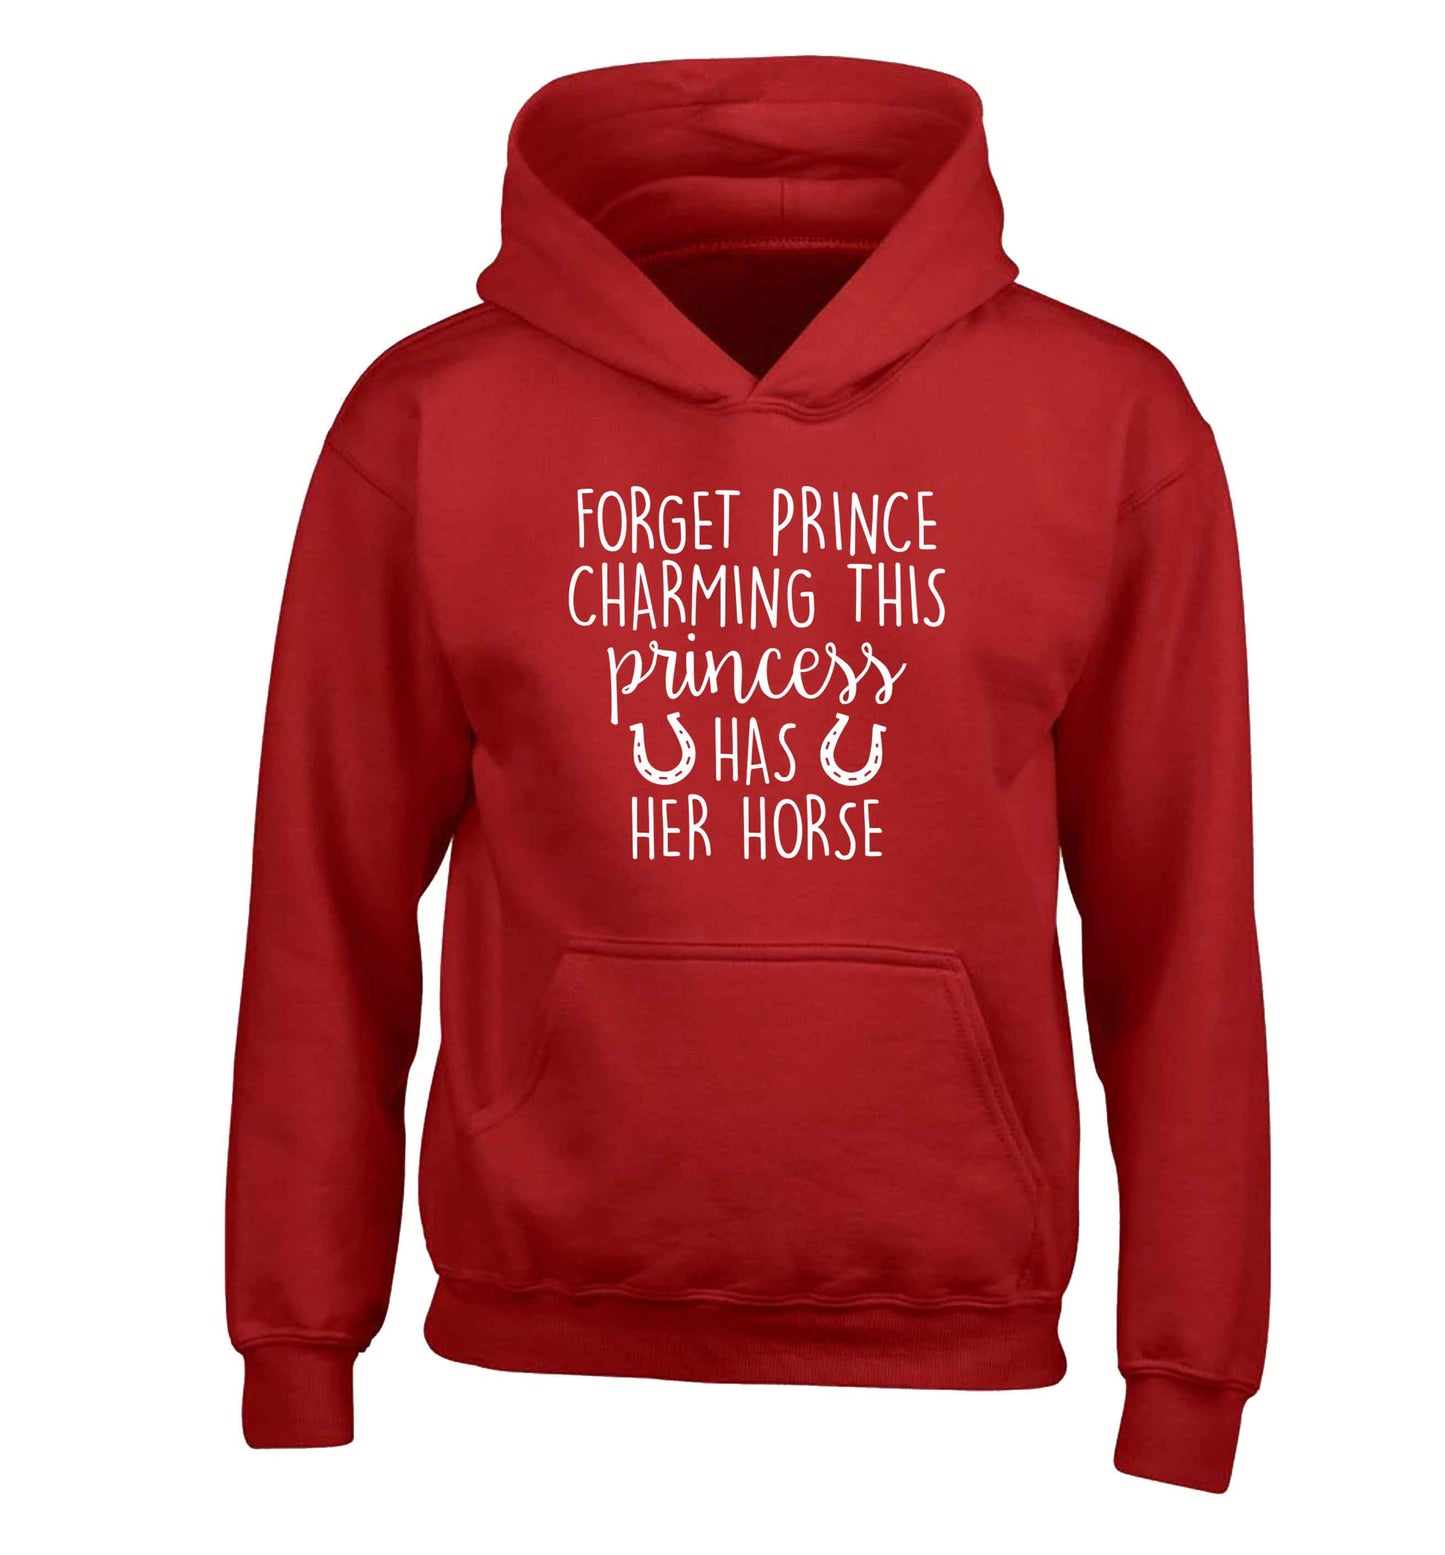 Forget prince charming this princess has her horse children's red hoodie 12-13 Years